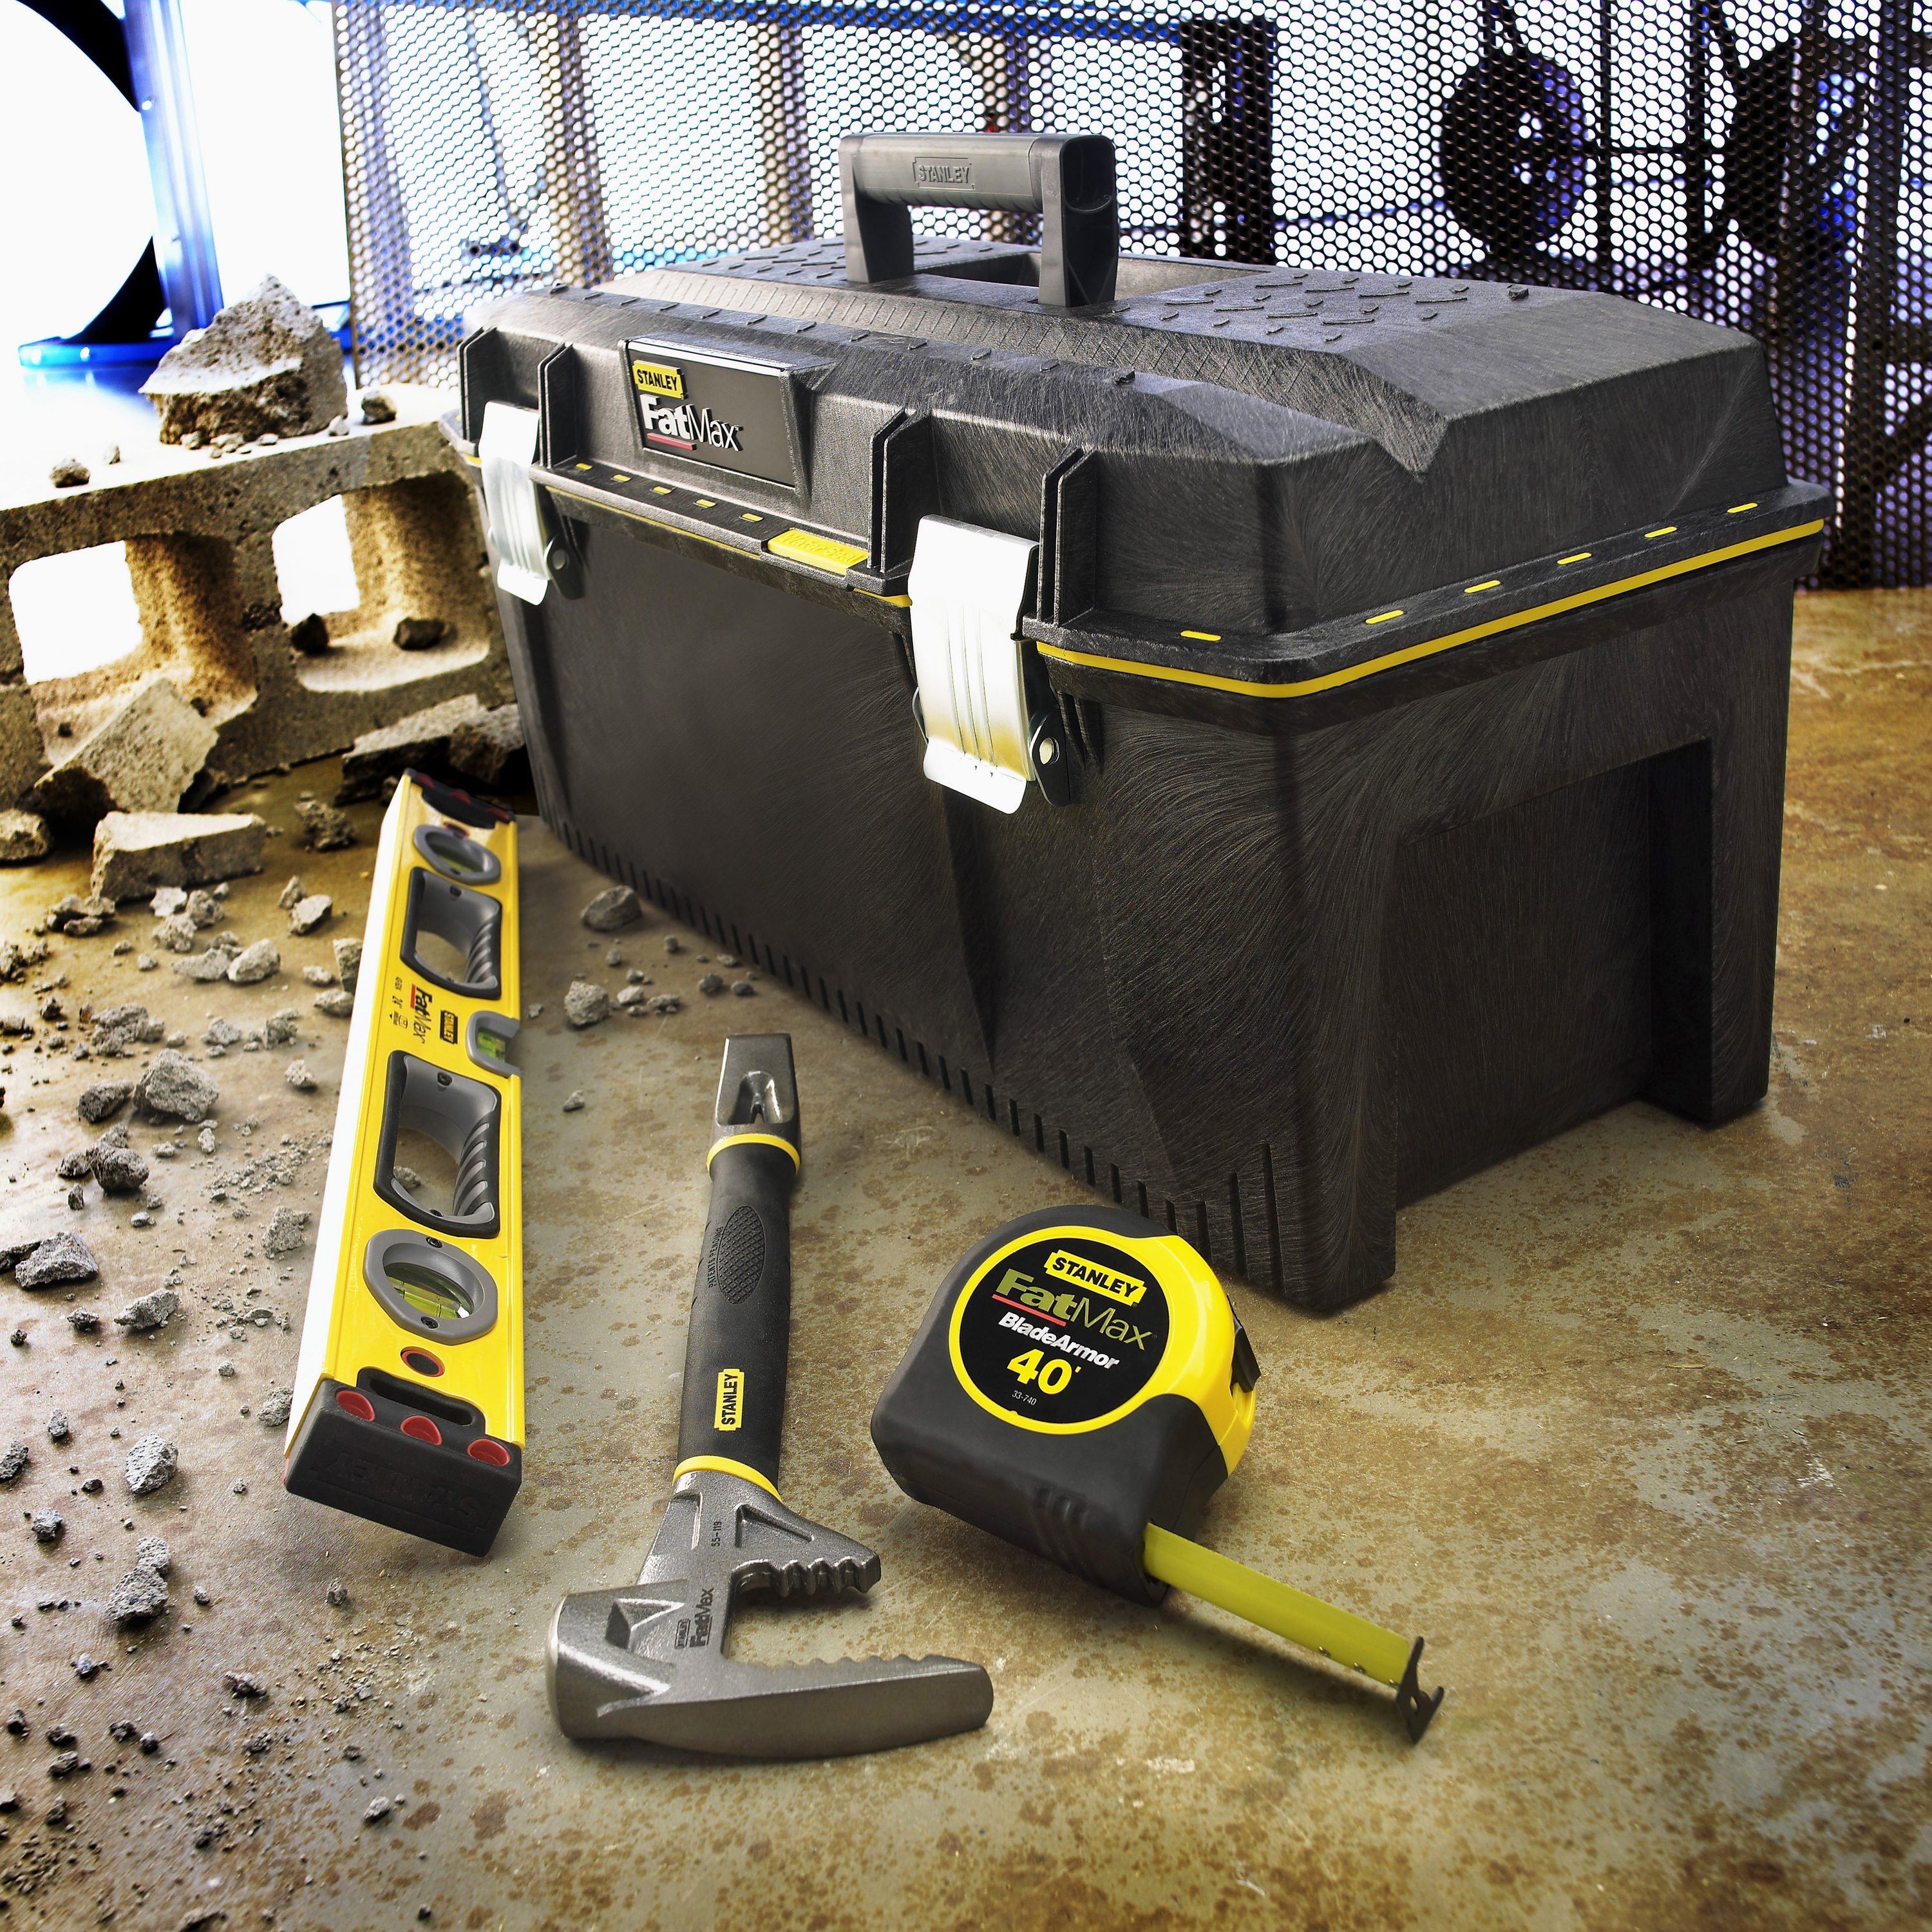 New Stanley FatMax Tool Cases